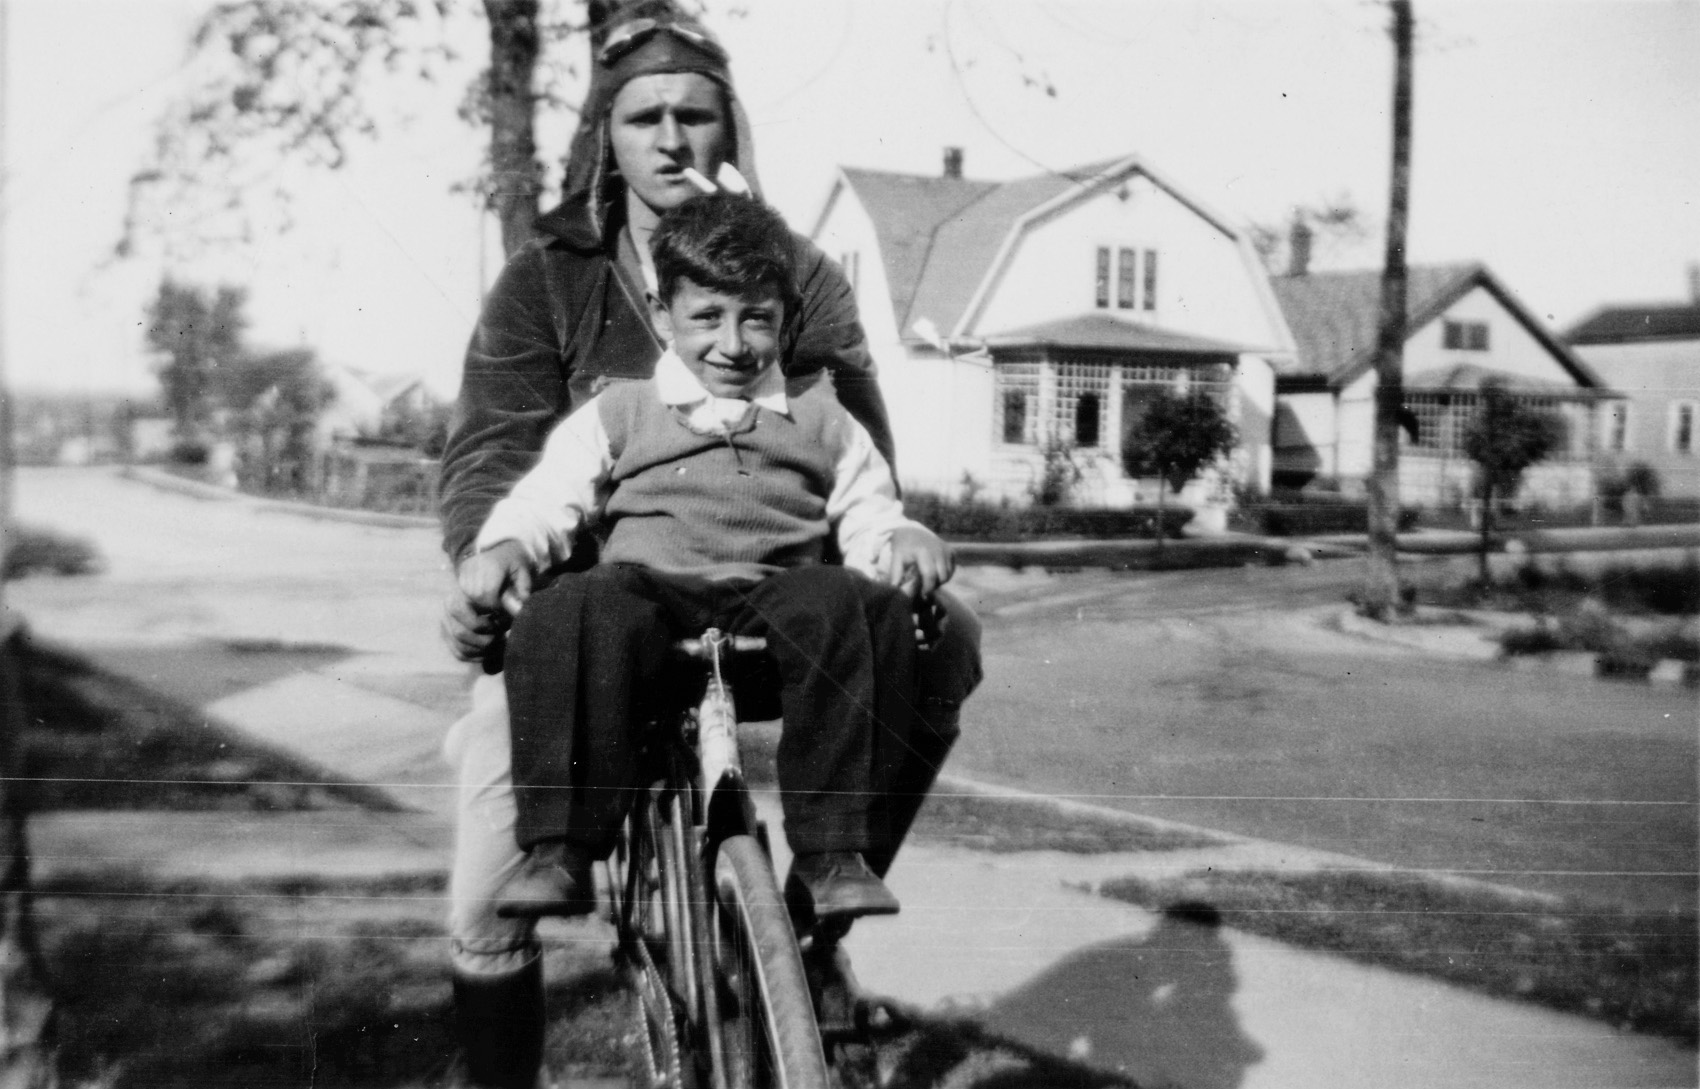 That's my great grandpa riding the bike and his little brother Pete on the handlebars. This is probably the early '30s in Illinois. View full size